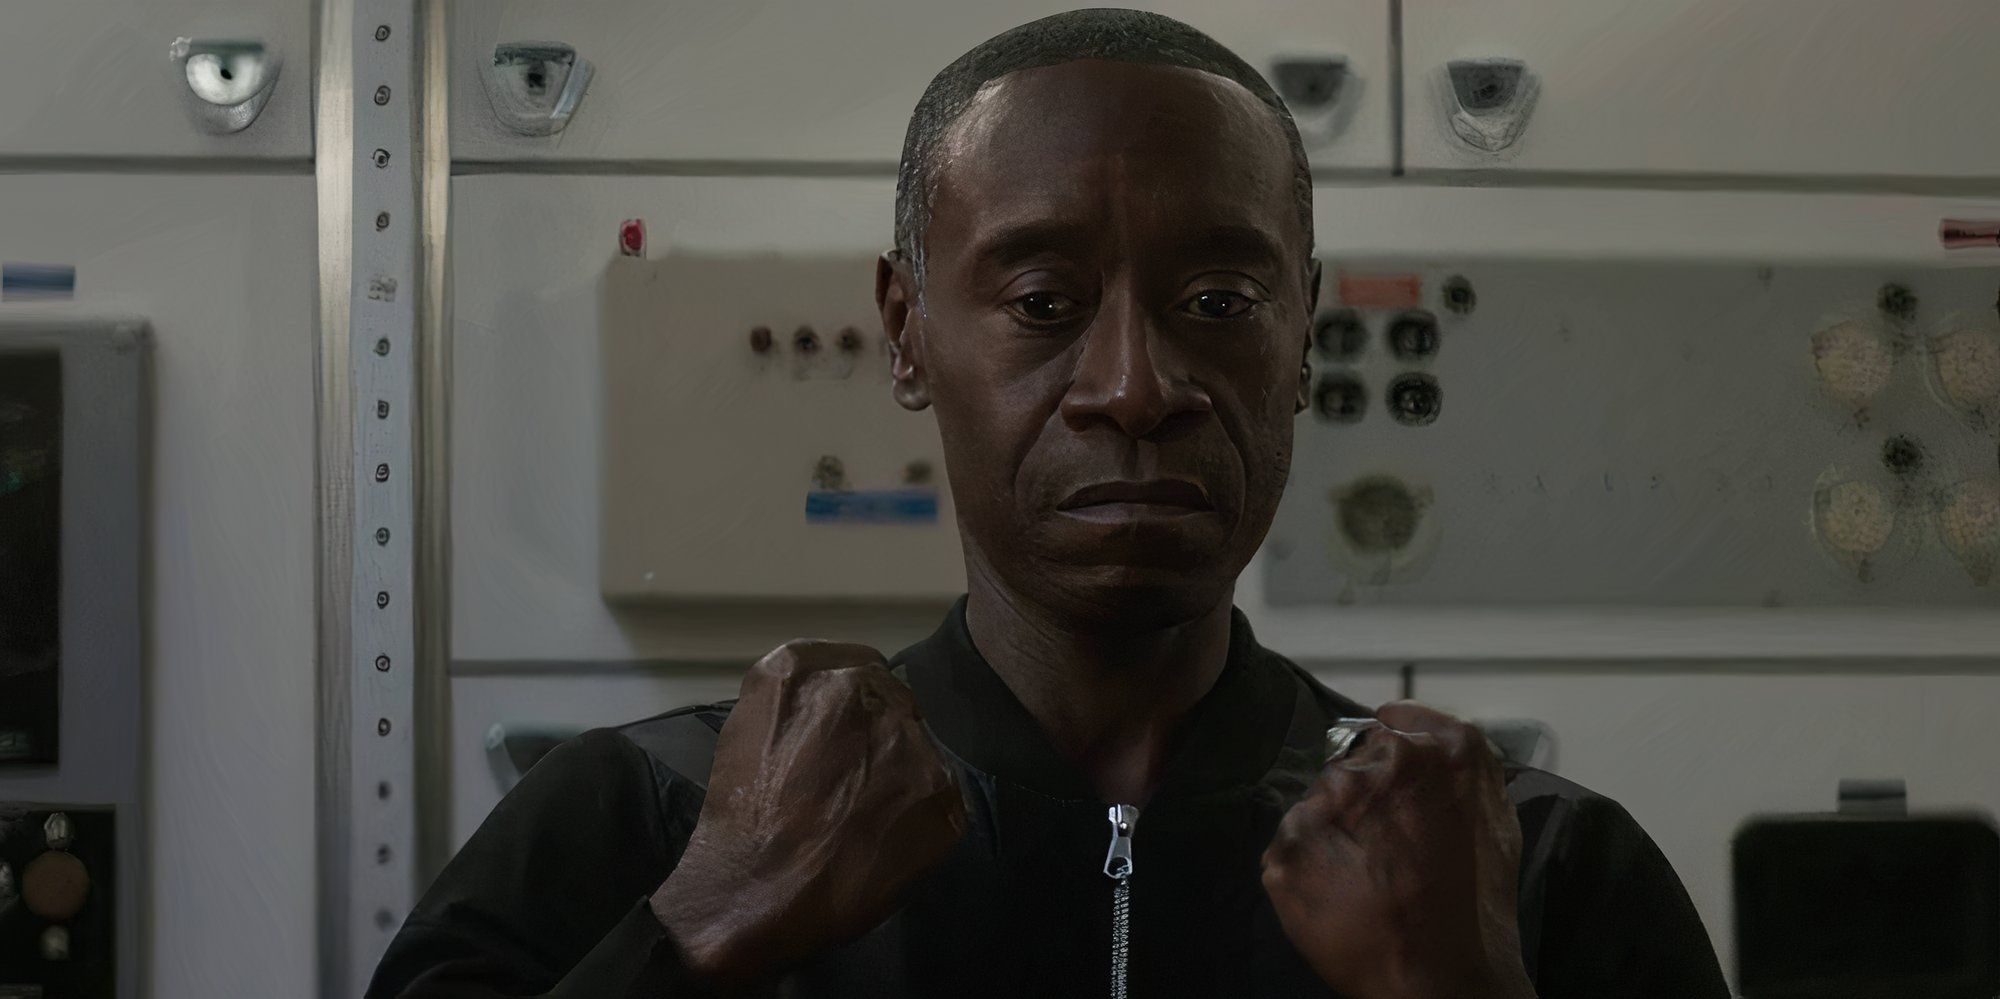 Don Cheadle as Rhodey in Avengers Endgame with his fists clenched.